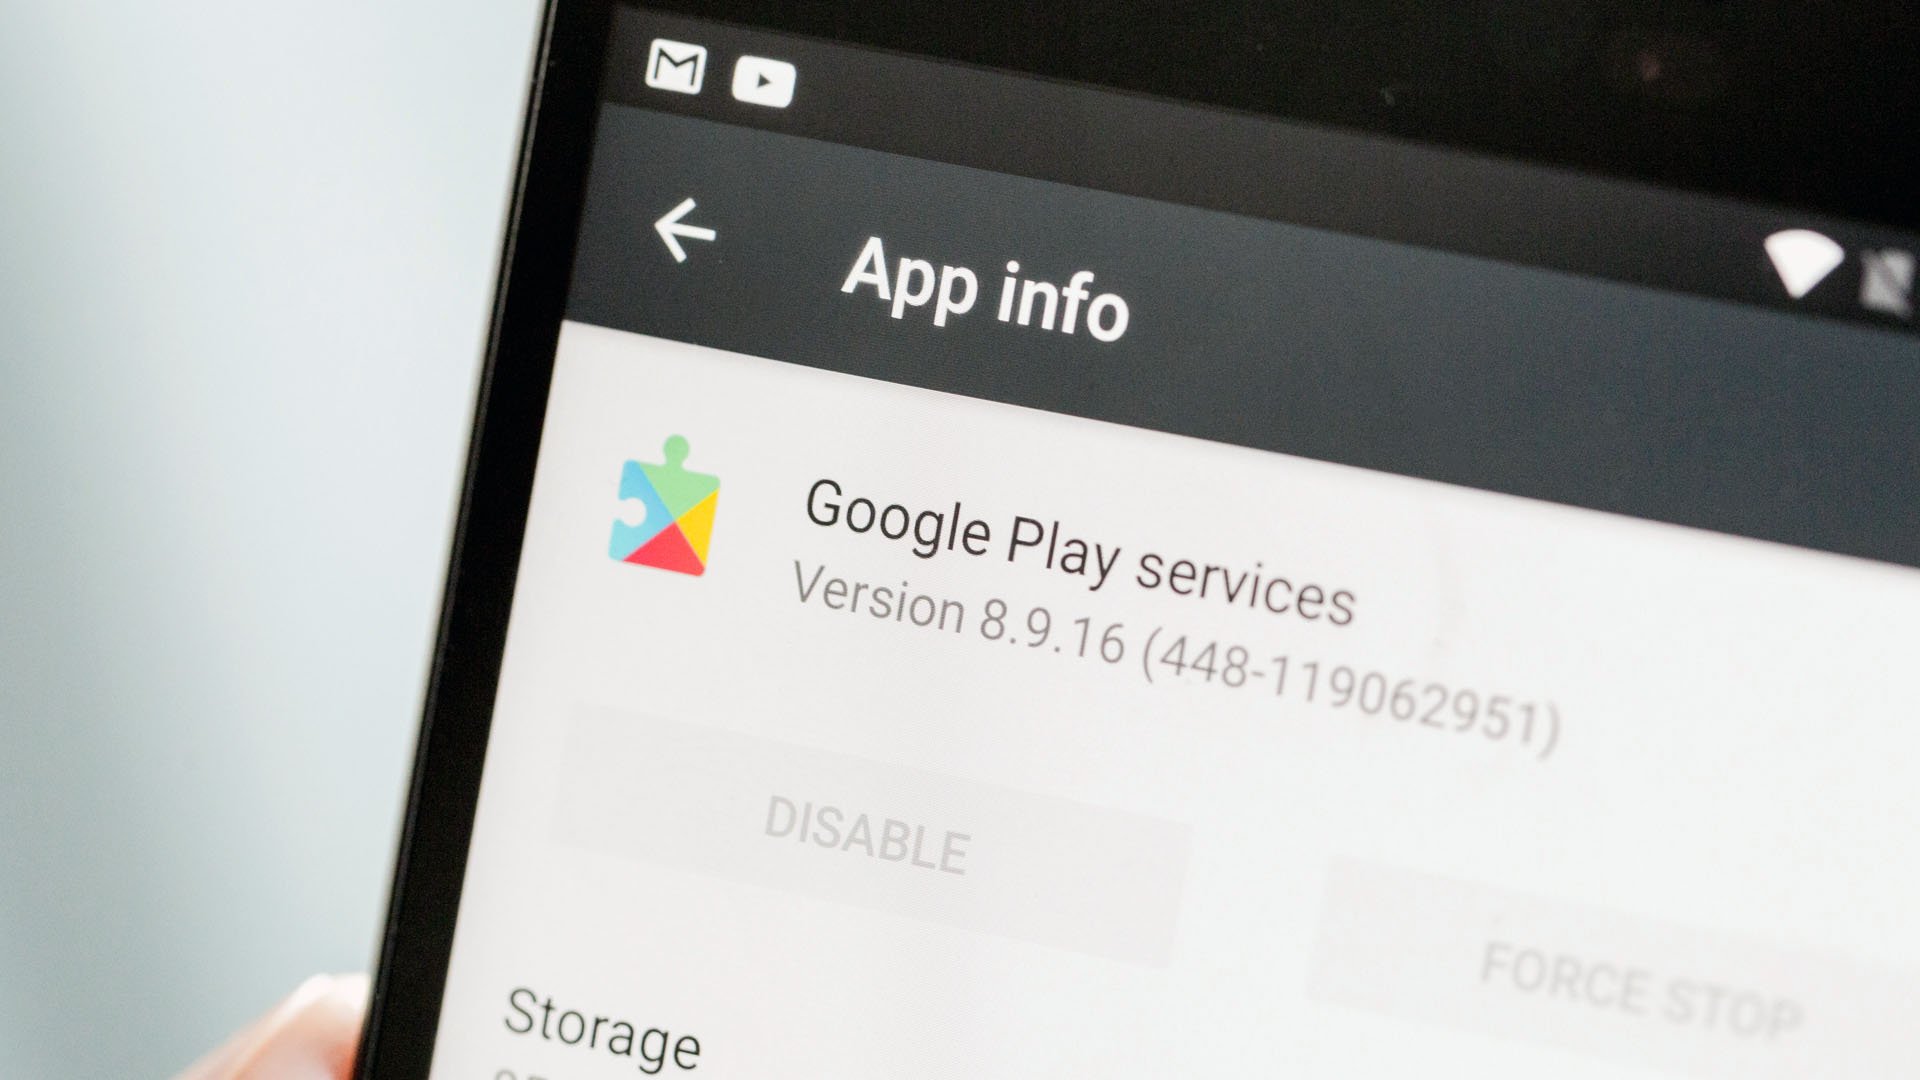 Google play services for android 4.4.2 free download